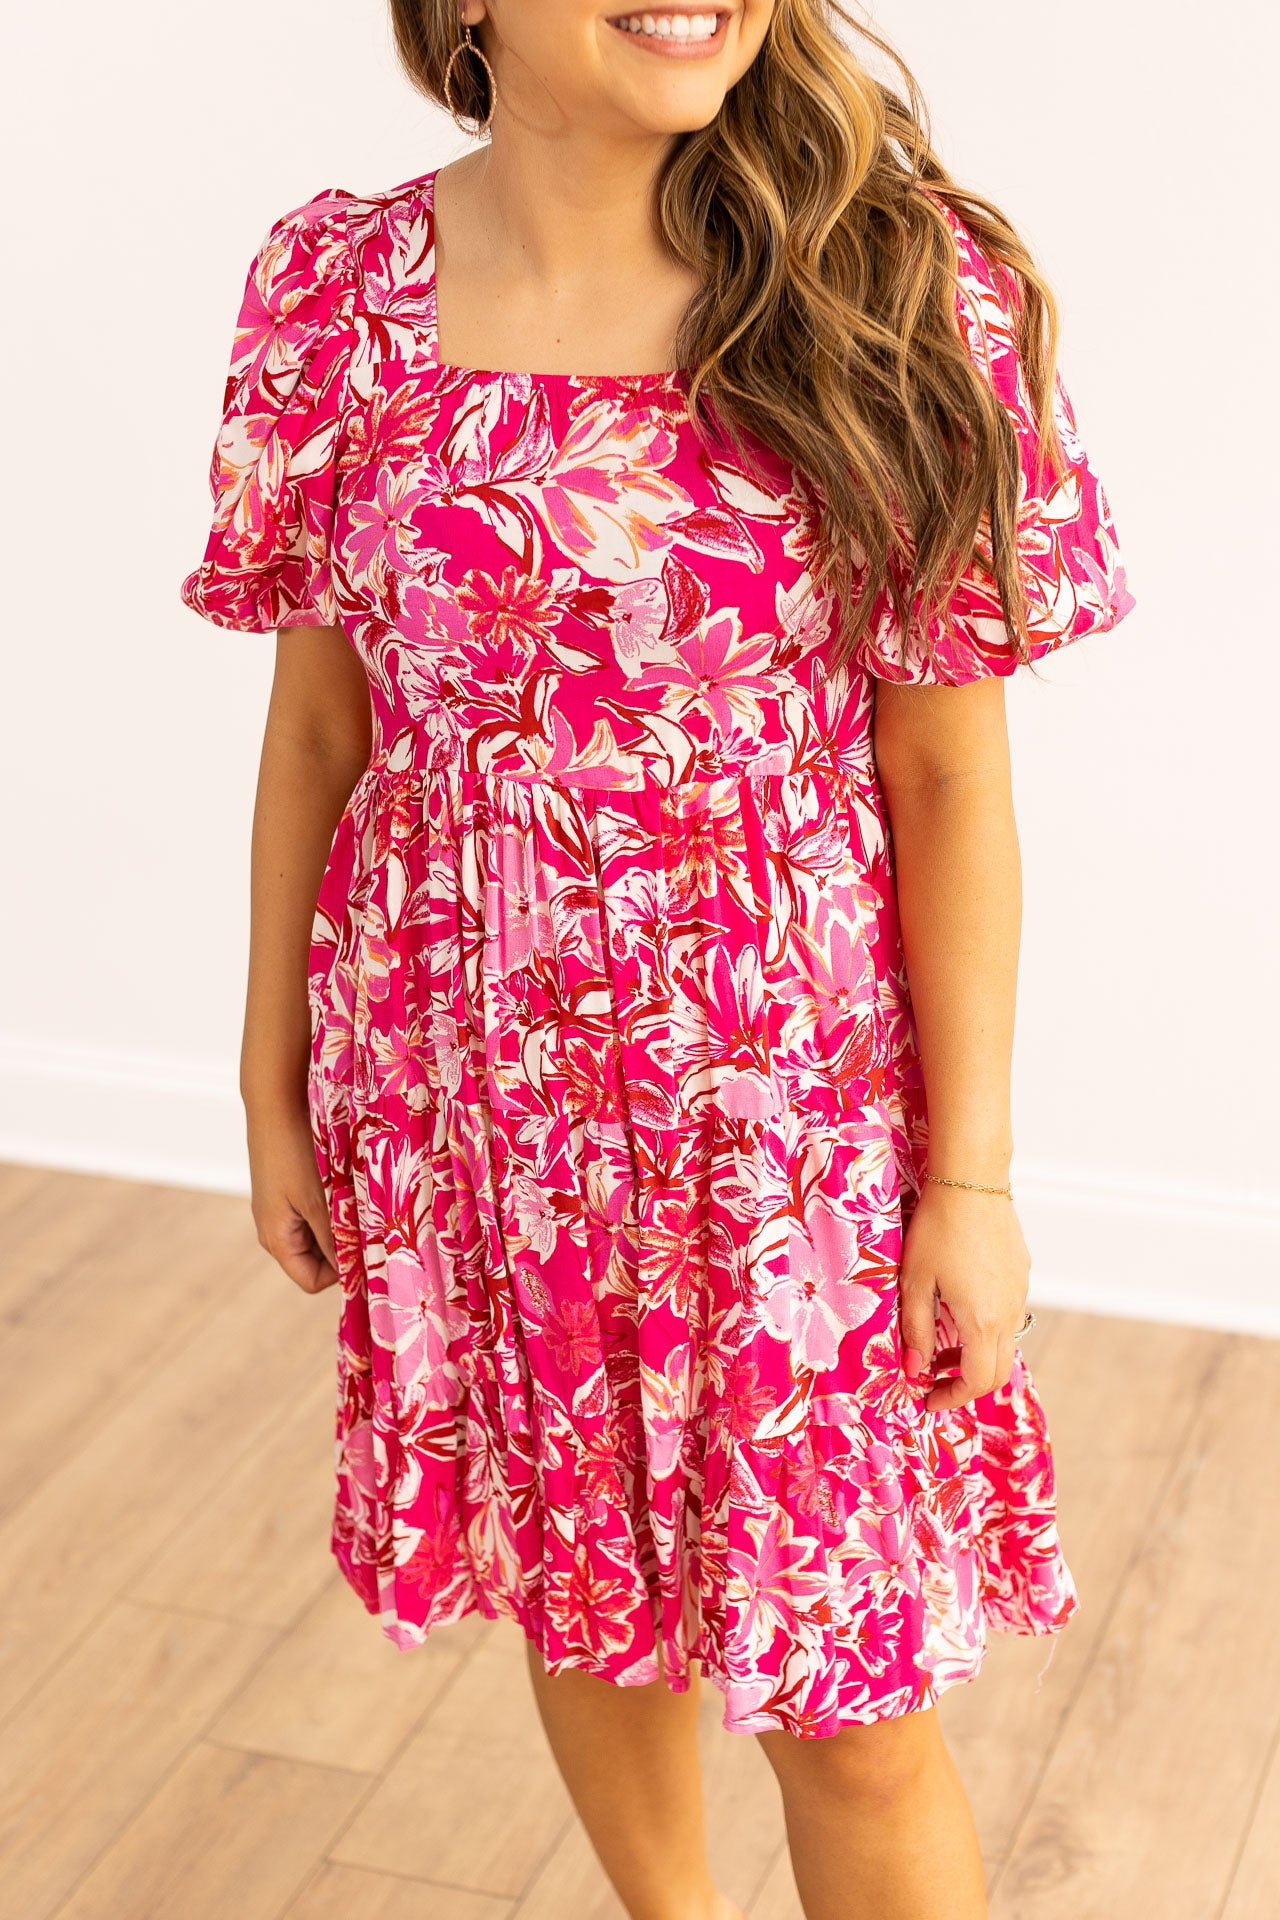 Dolly Doll Butter Chiffon Dress, Pink Floral